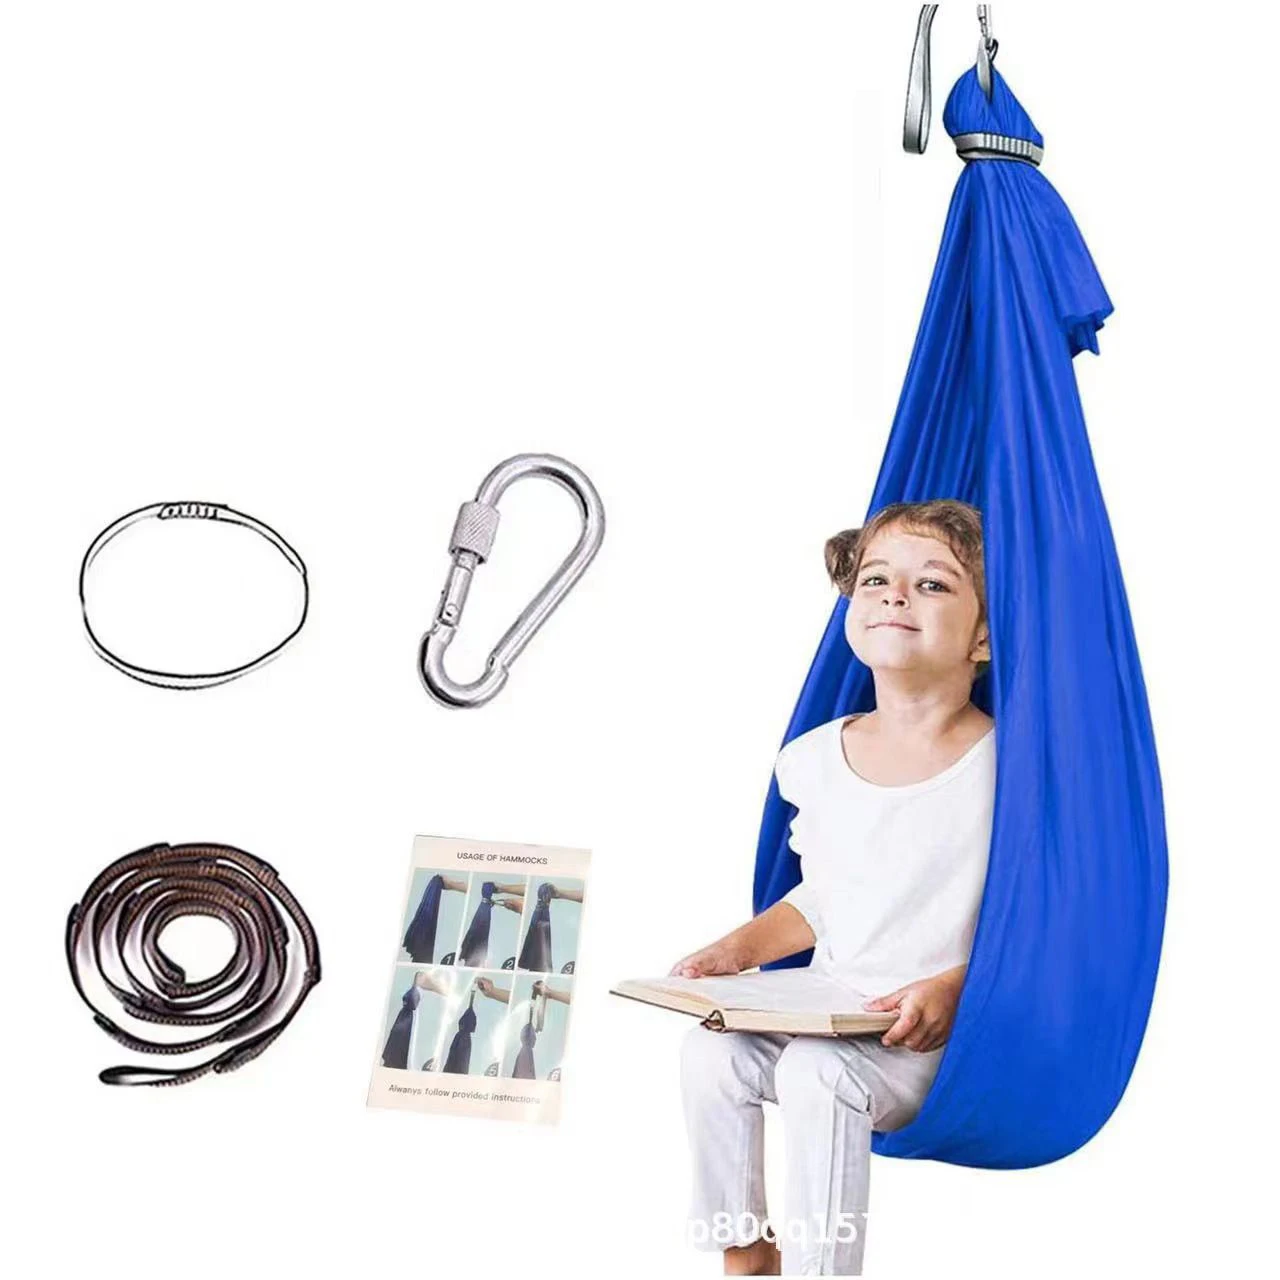 Elastic hammock for Autism Elastic Parcel Sensory Child Therapy Steady Seat Swing Kids Swing Hammock Chairtoy Indoor outdoor toy